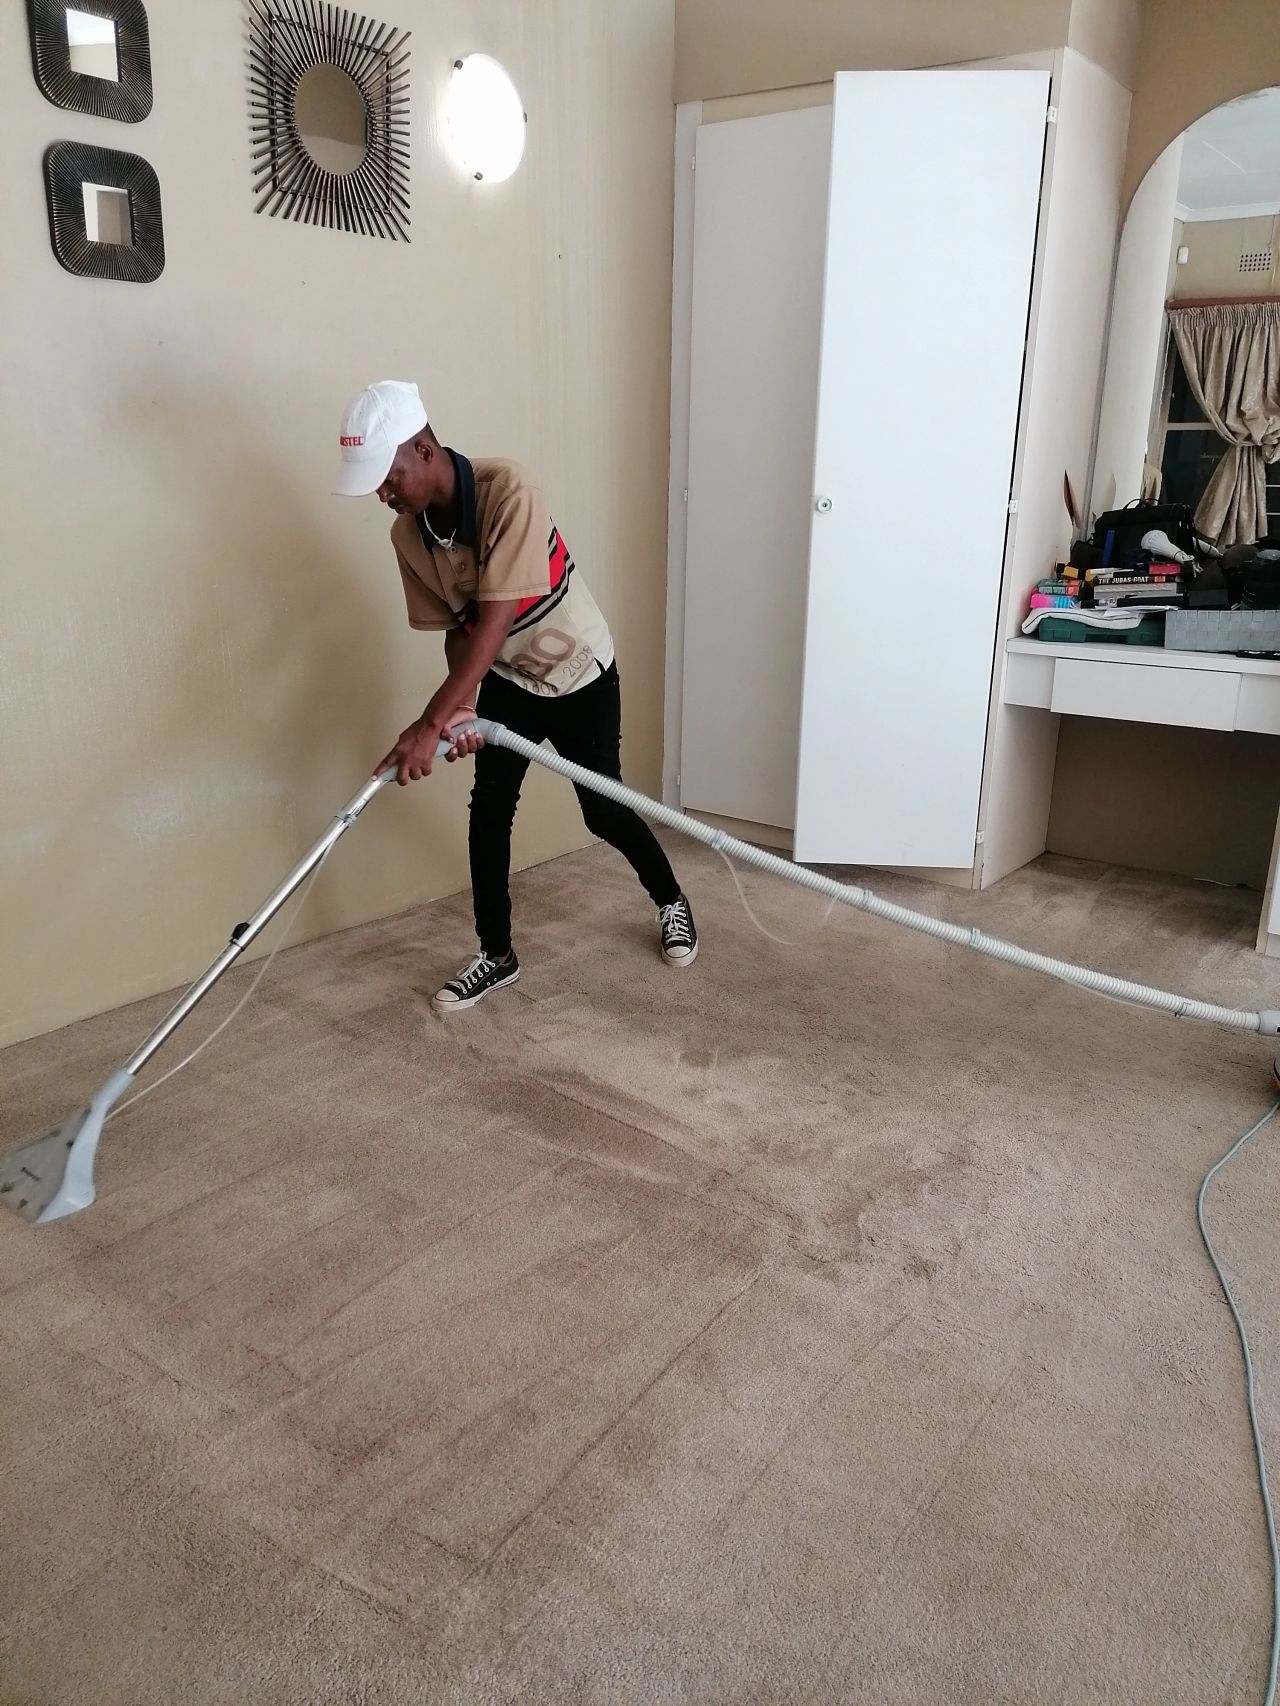 The Journey of South African Nthabiseng Baloyi and Hyades Cleaning Solutions (Pty) Ltd